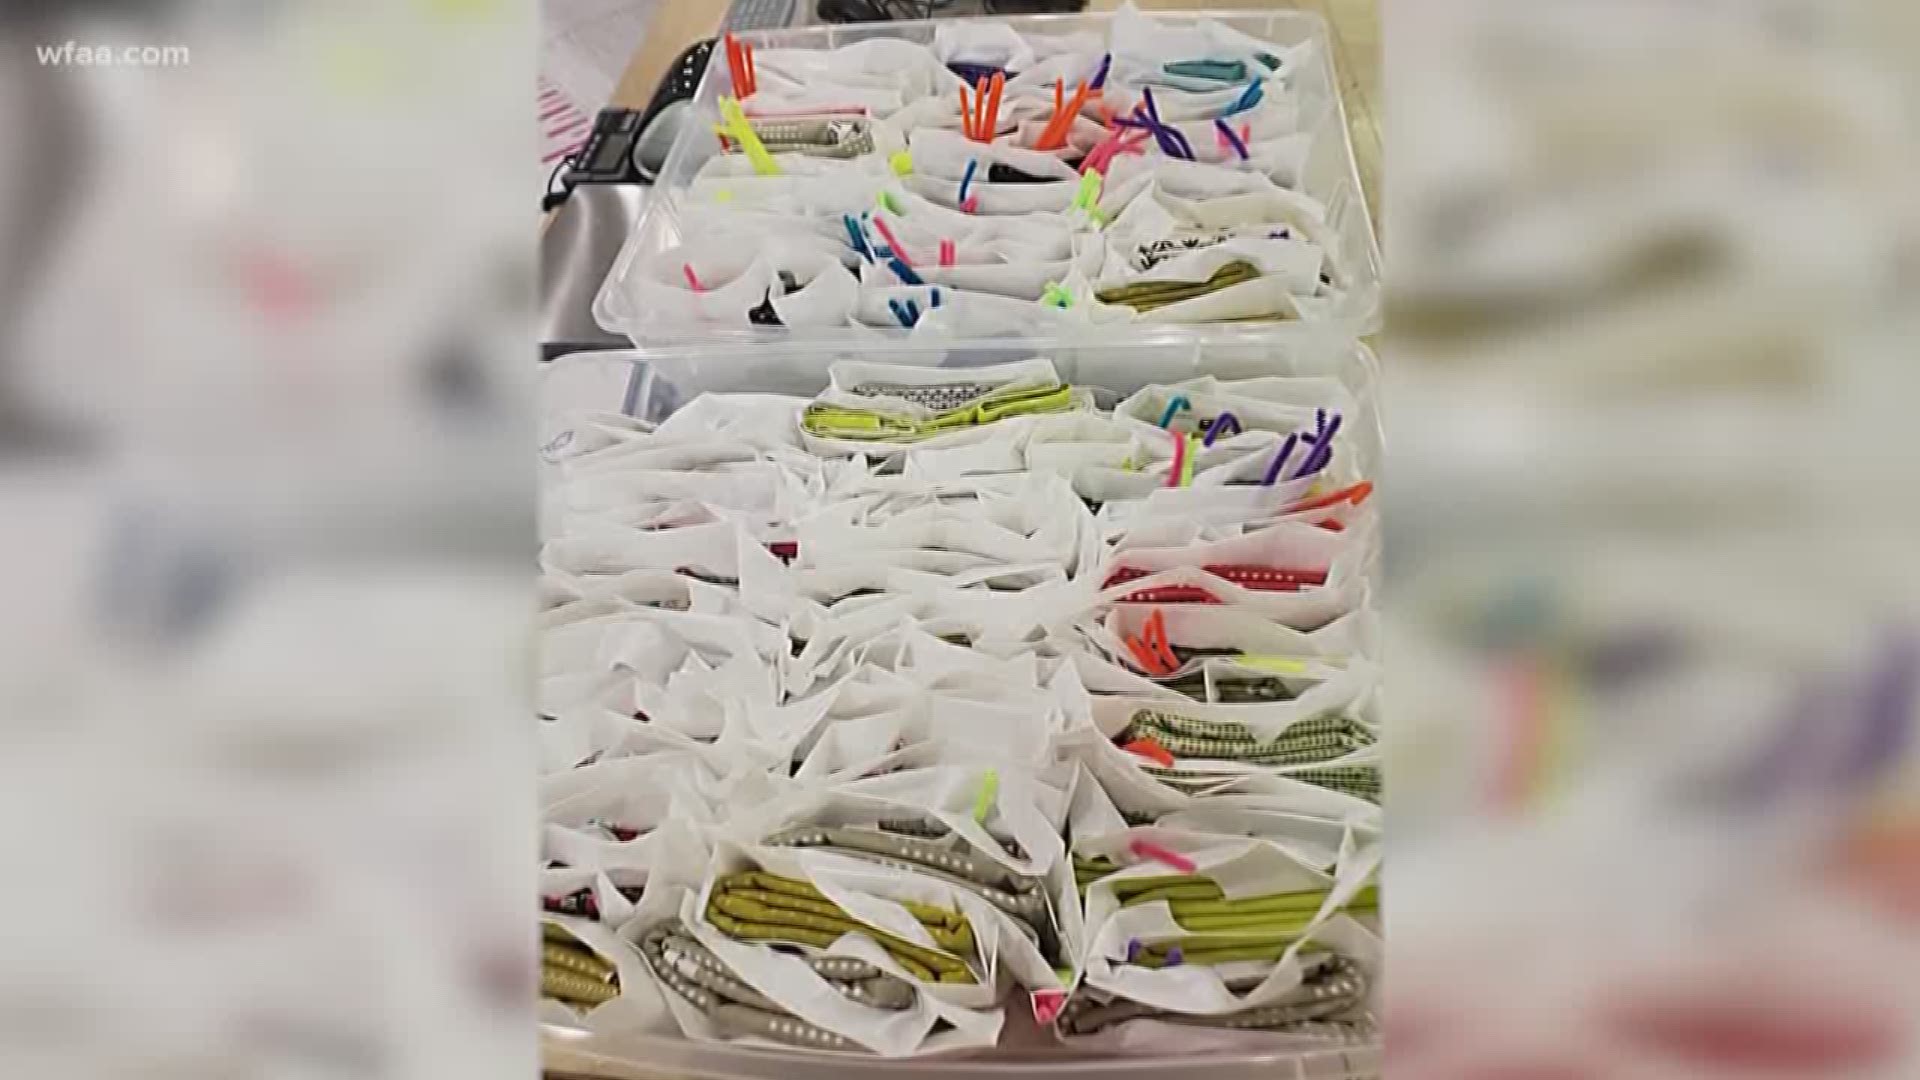 The Stitch House in Plano is giving away kits of supplies for people who want to help make needed masks.